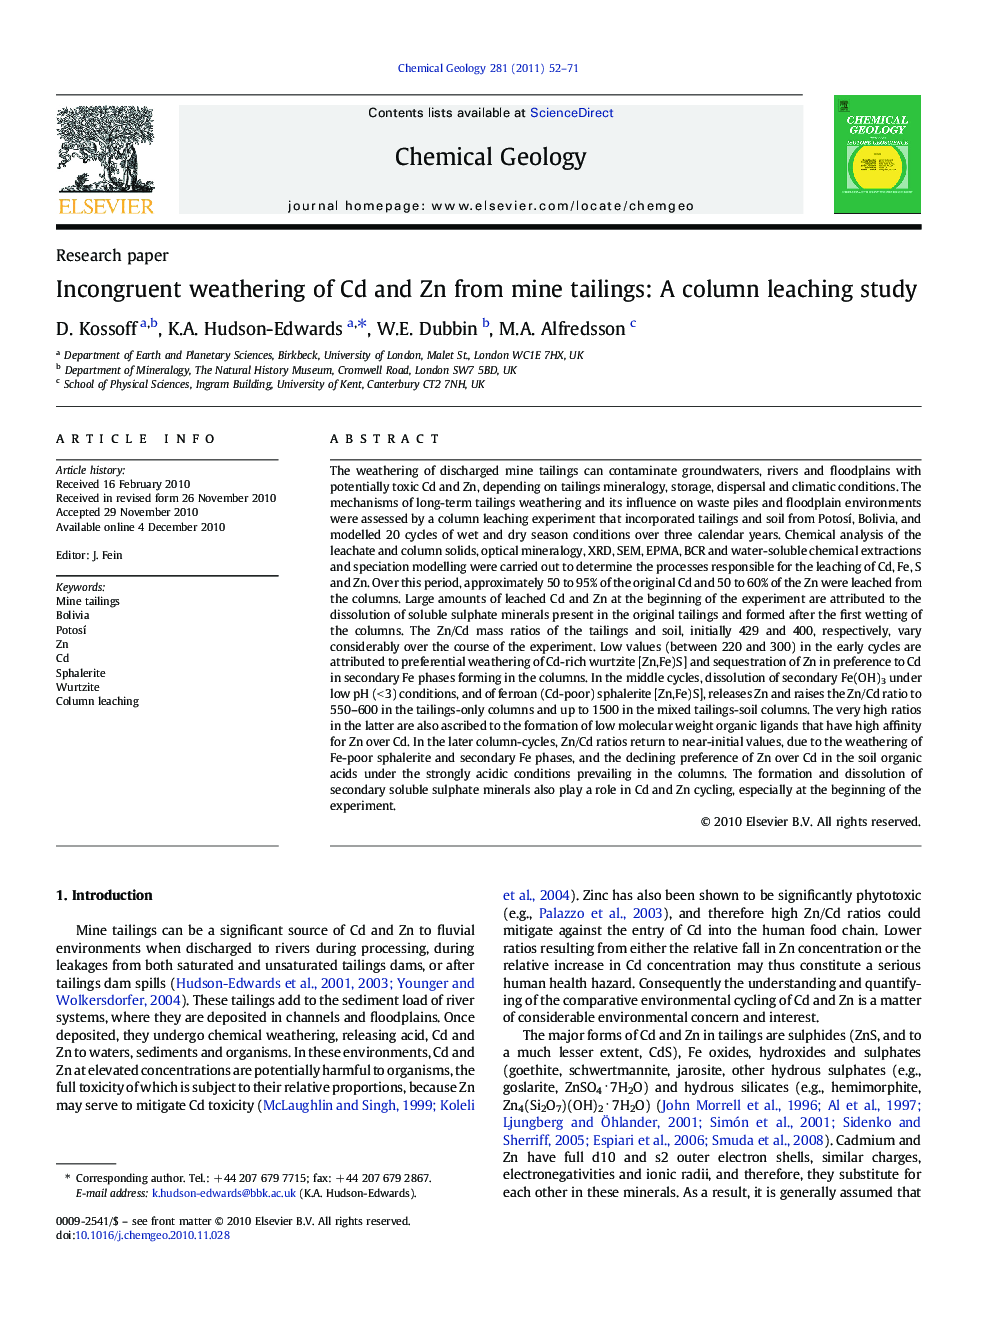 Research paperIncongruent weathering of Cd and Zn from mine tailings: A column leaching study